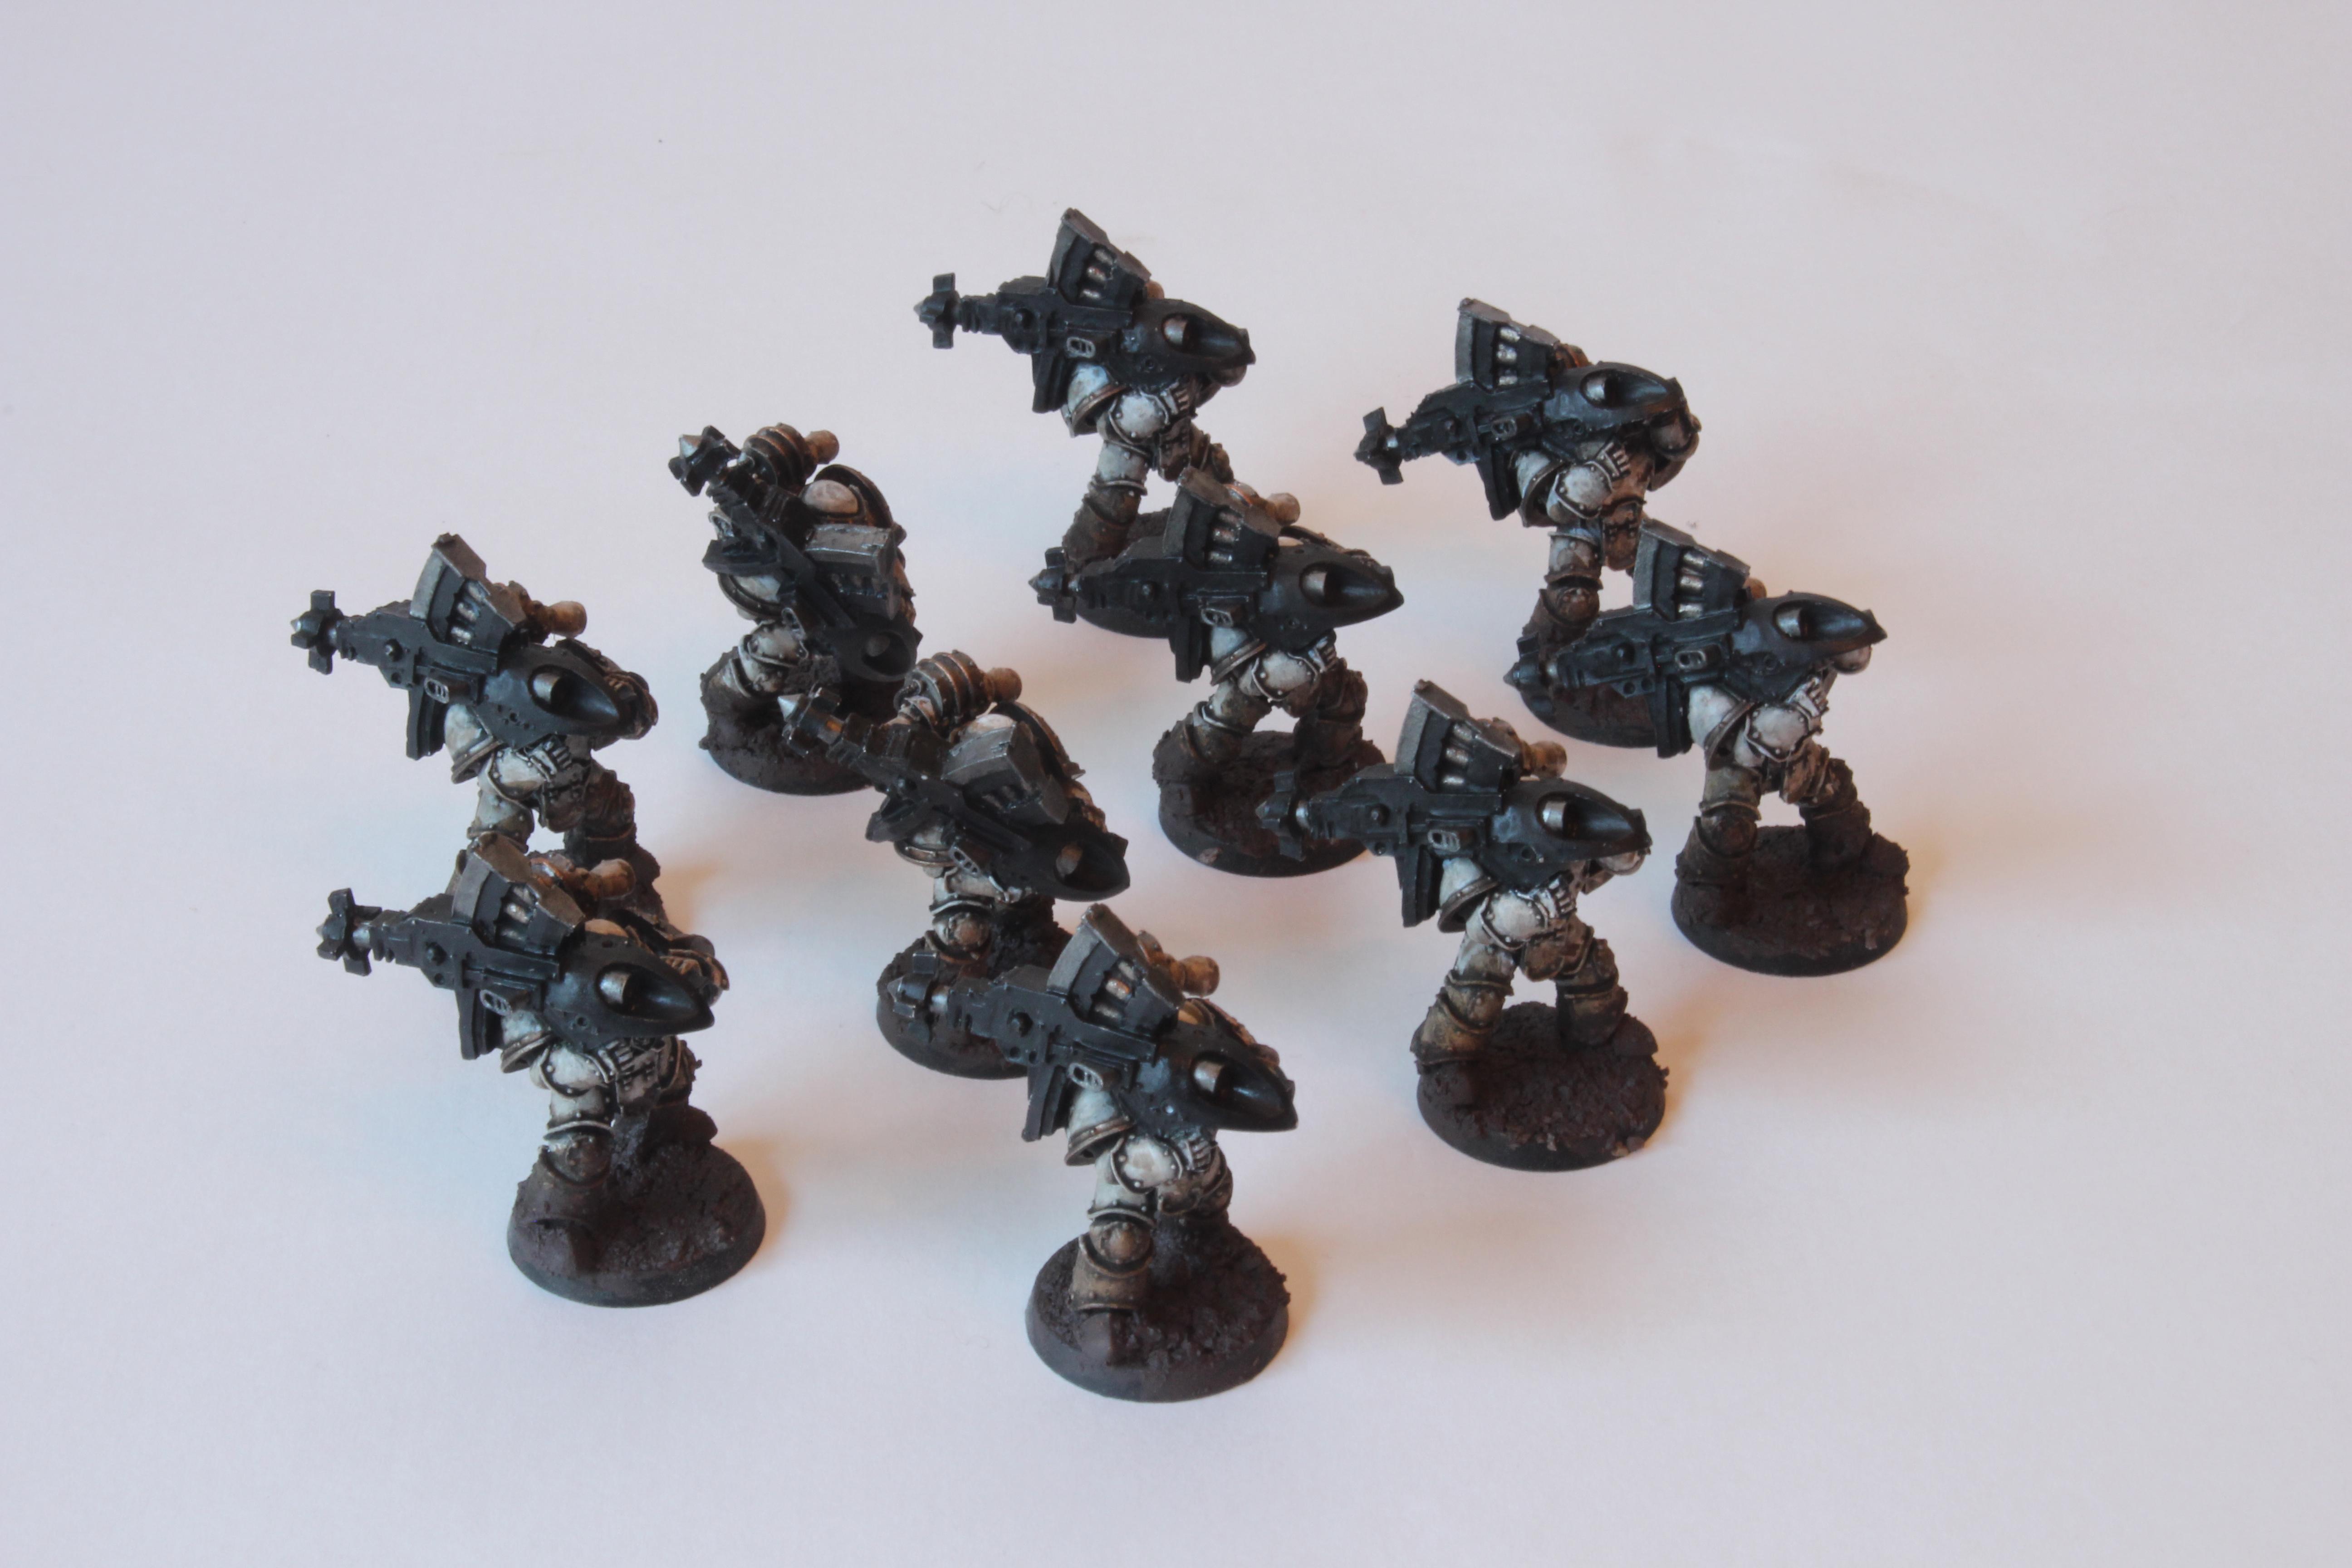 14th Legion, 30k, Chaos, Chaos Space Marines, Death Guard, Forge World, Frag Missiles, Heavy Support Squad, Horus Heresy, Krak Missiles, Missile Launchers, Nurgle, Warhammer Fantasy